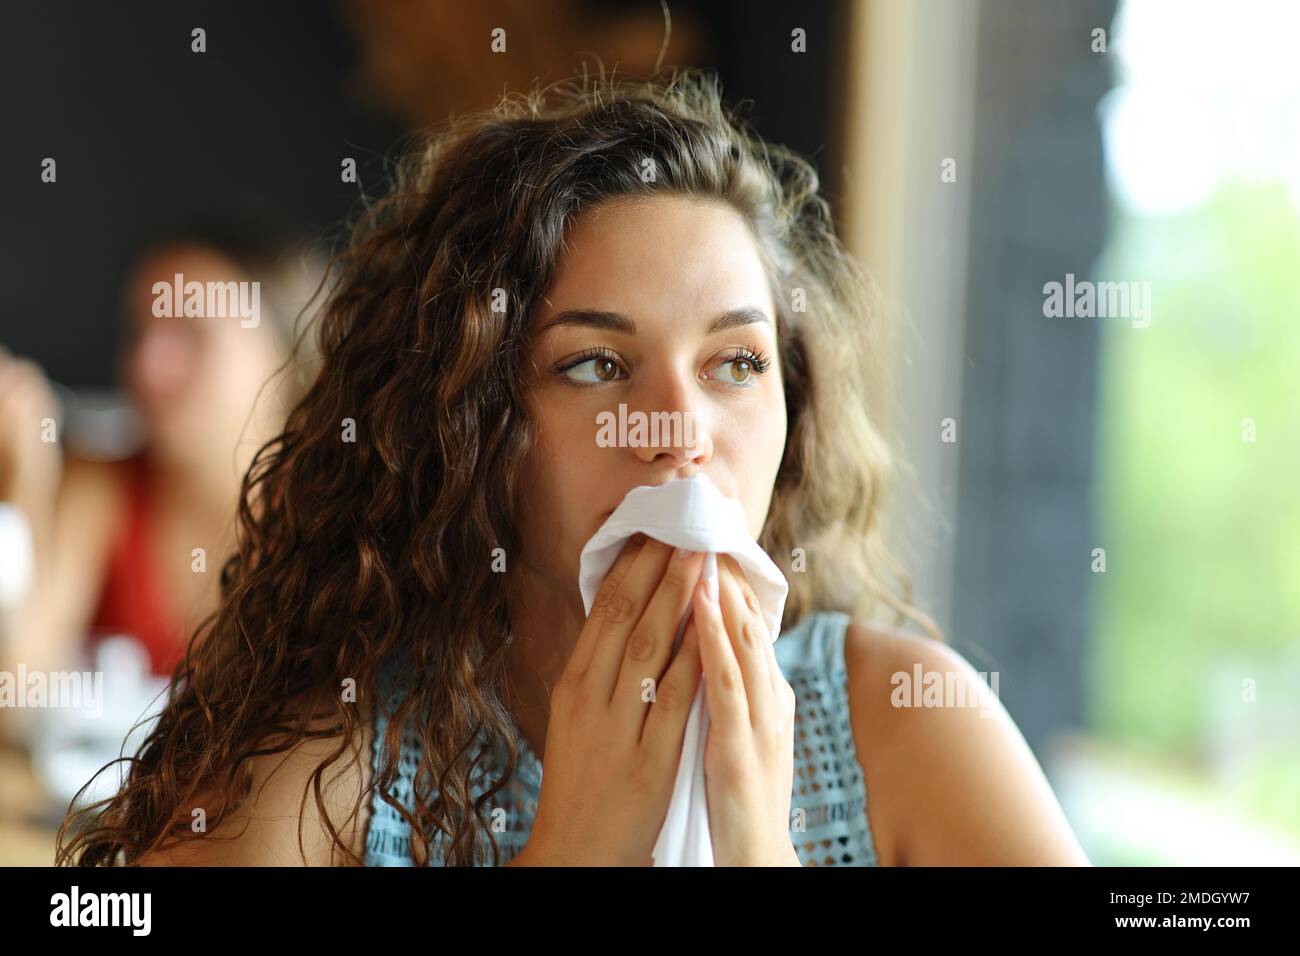 Woman cleaning mouth with a napkin in a restaurant Stock Photo